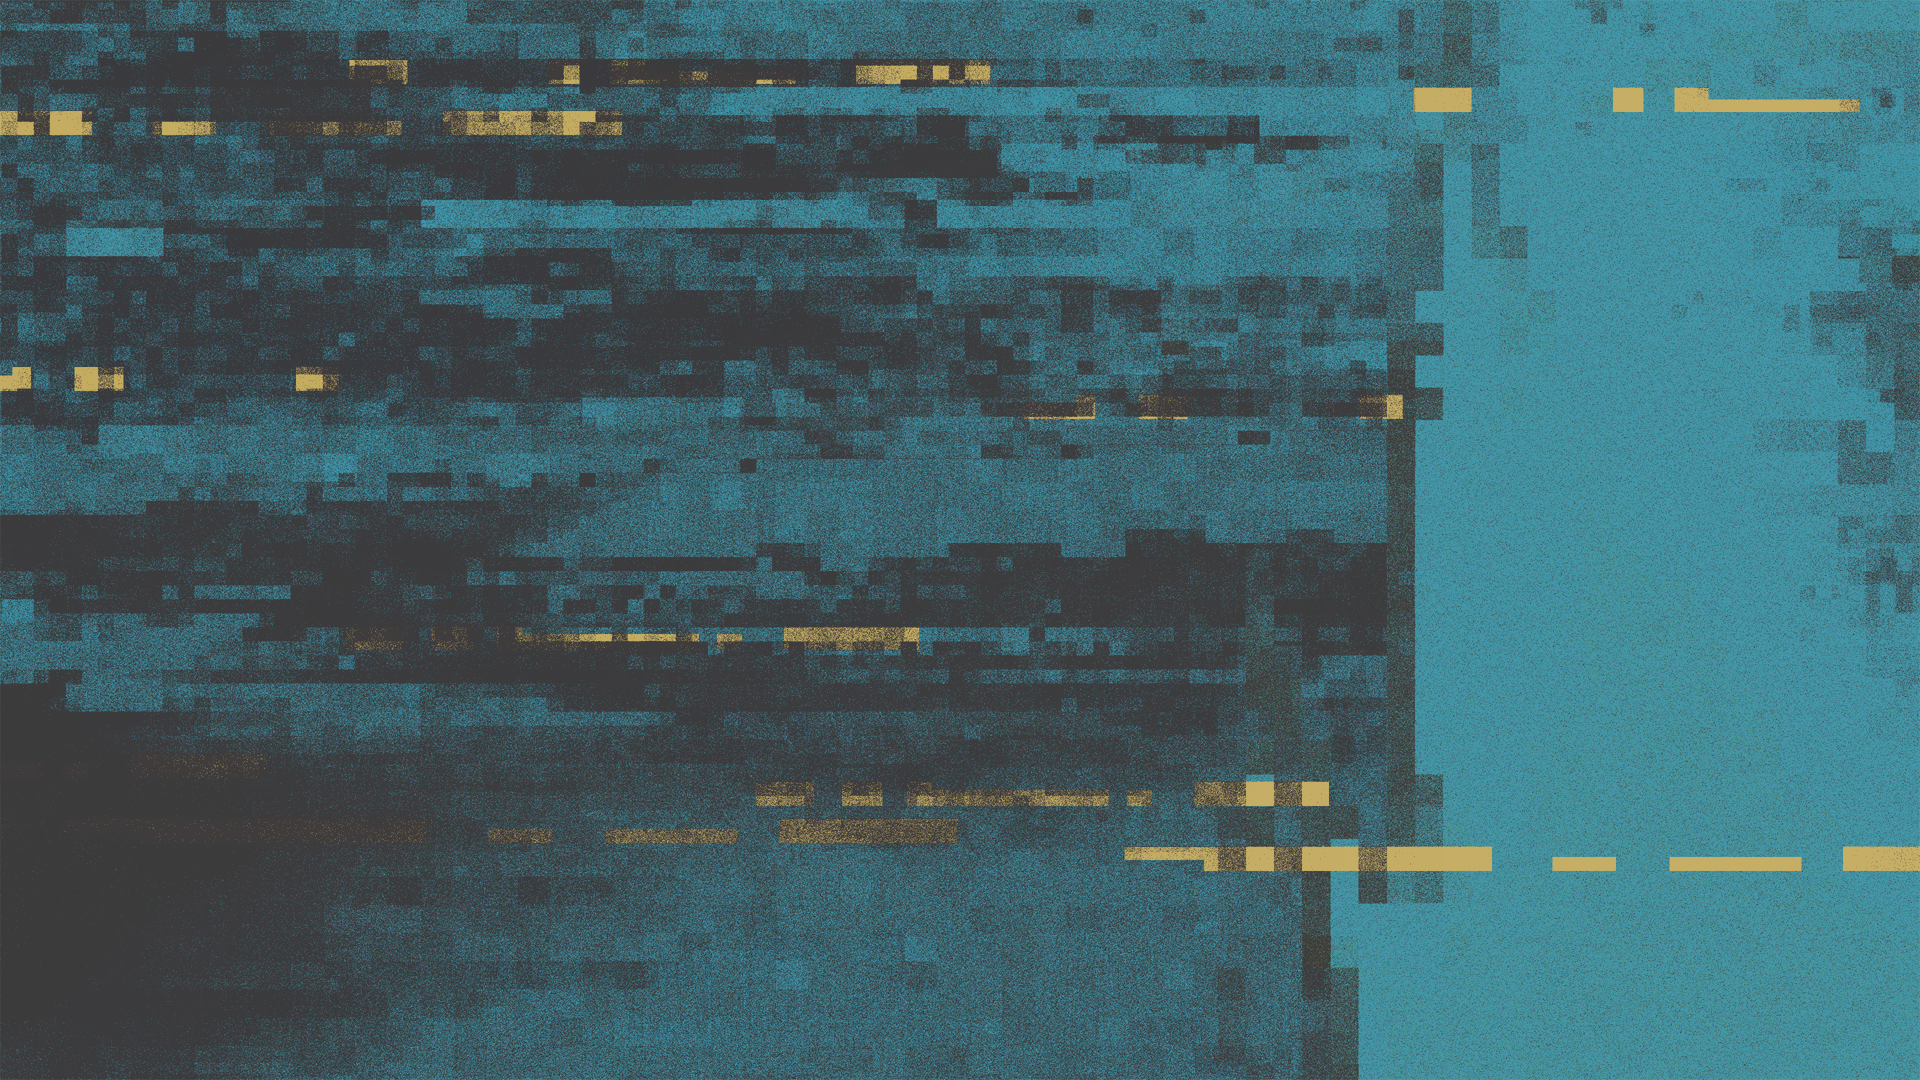 General 1920x1080 blue digital art teal abstract pixelated